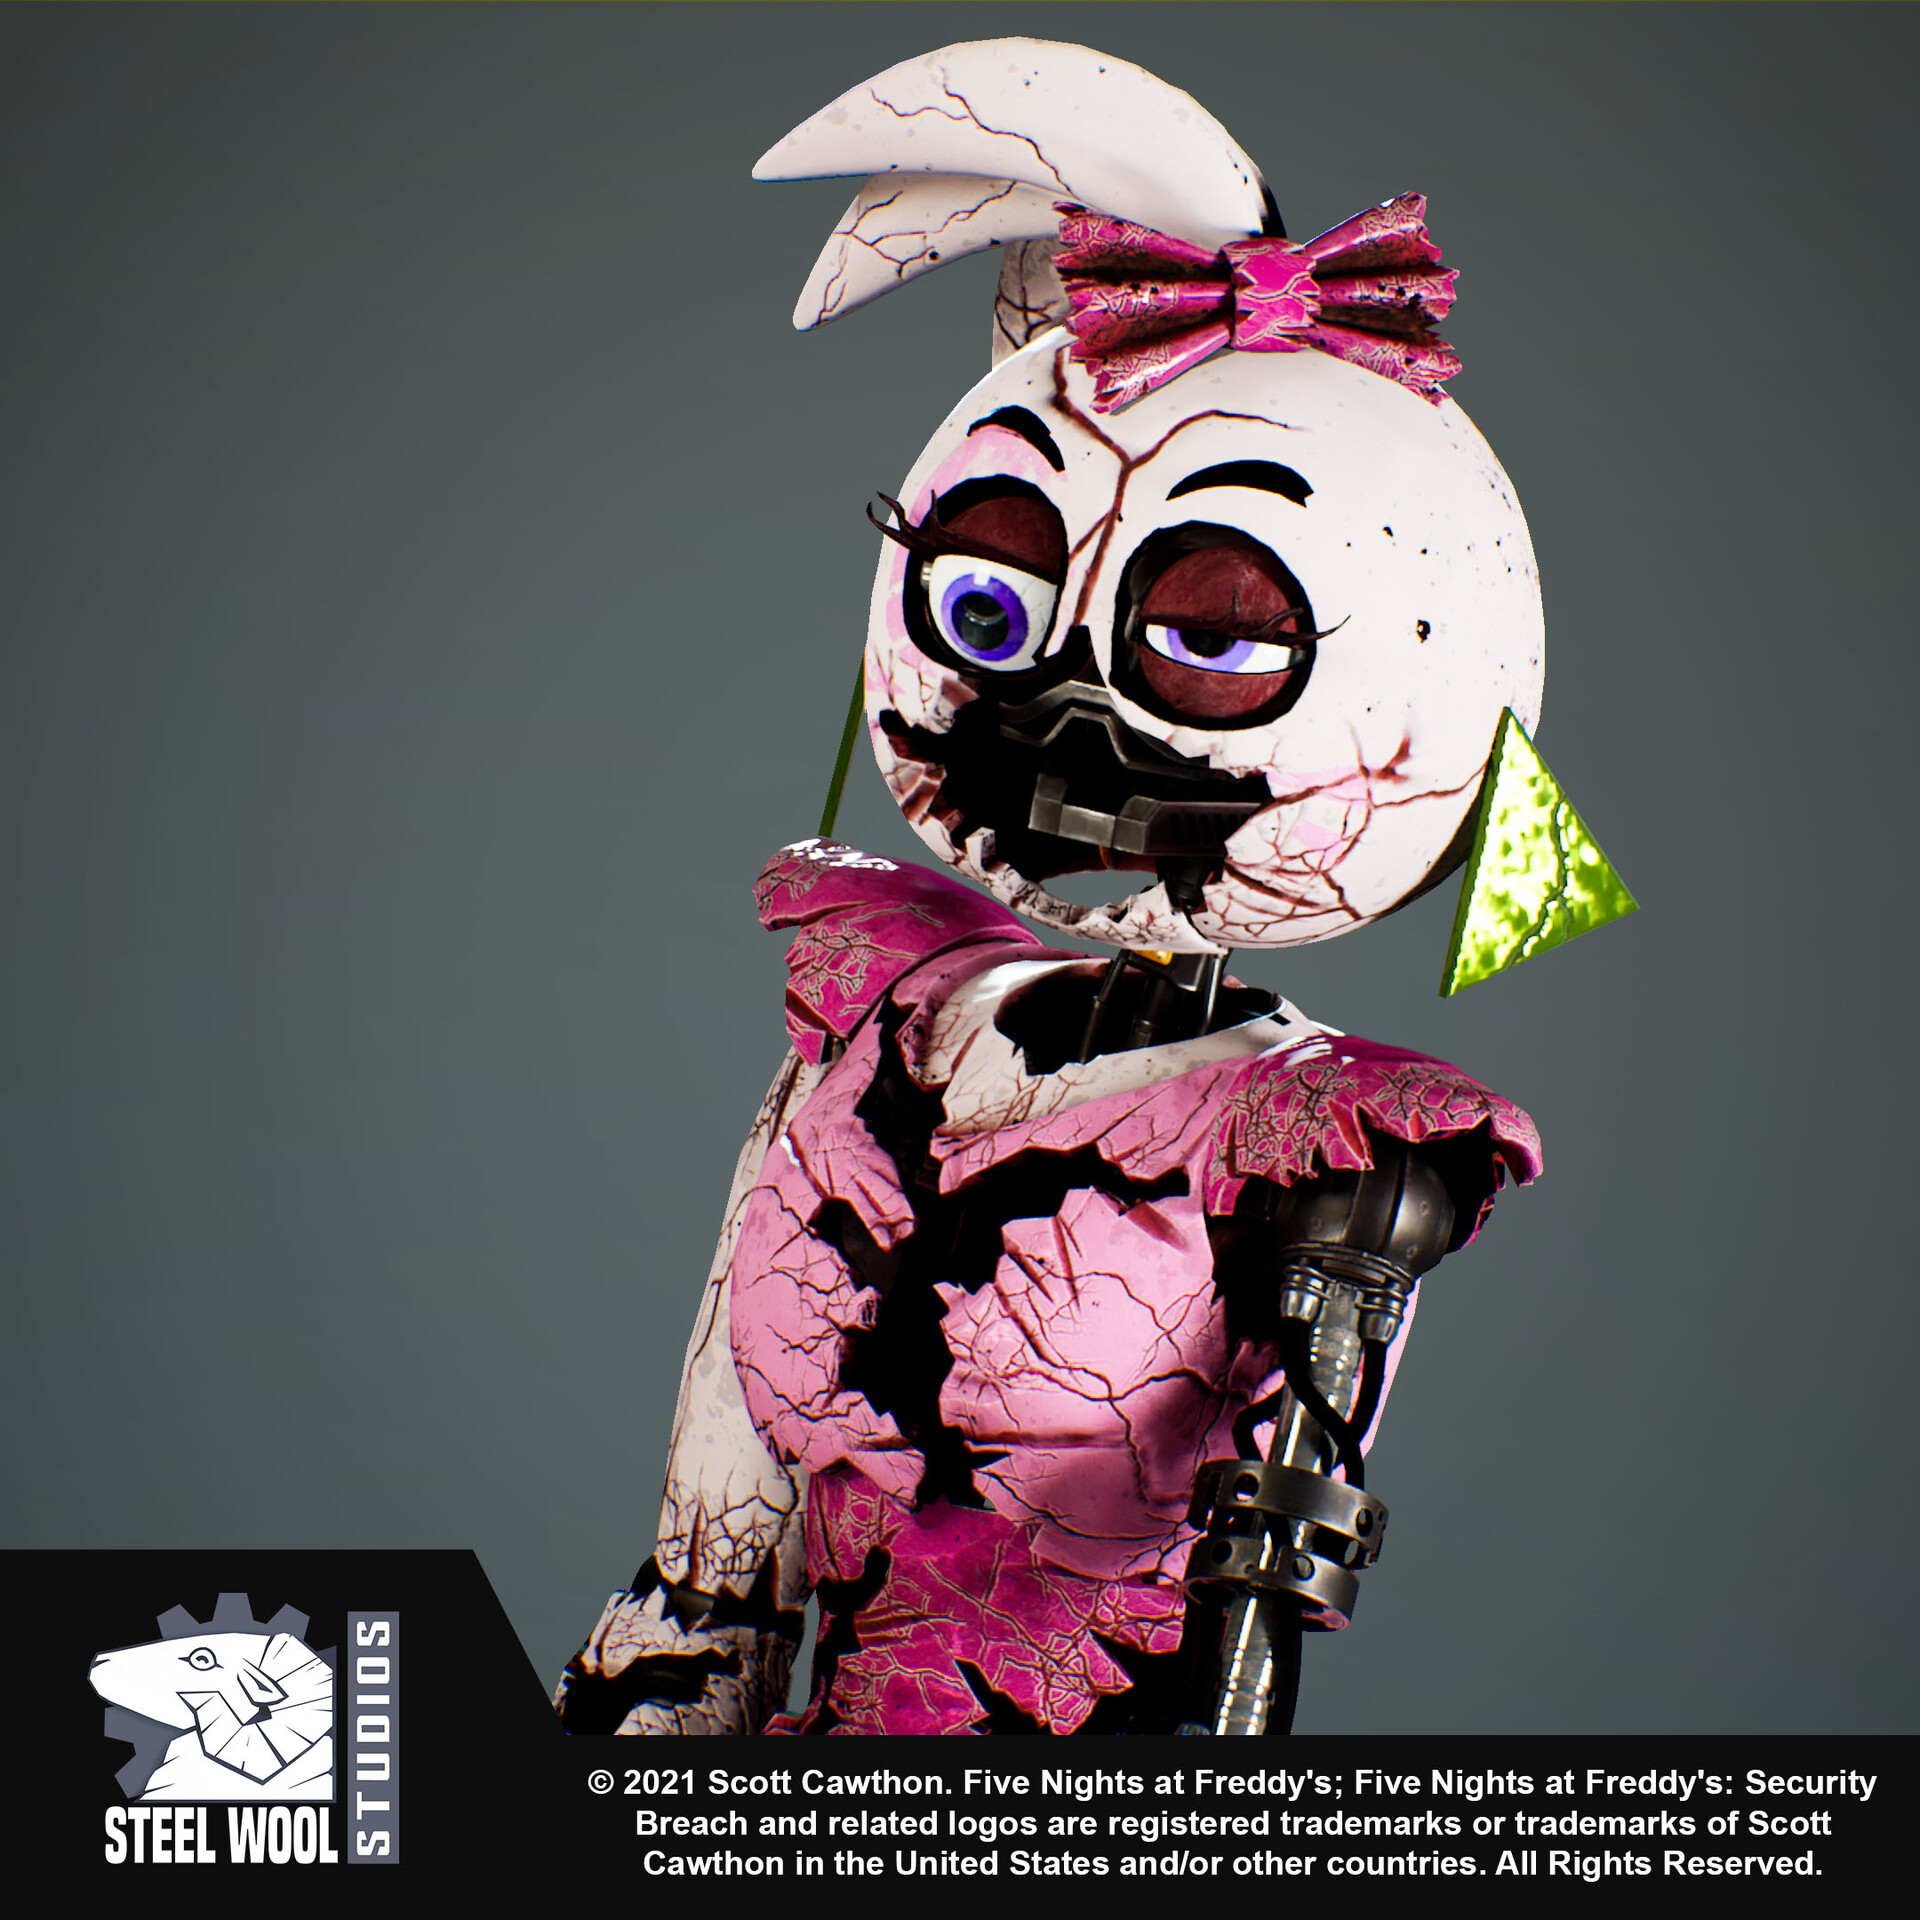 ArtStation - Five Nights at Freddy's: Security Breach - Shattered Chica